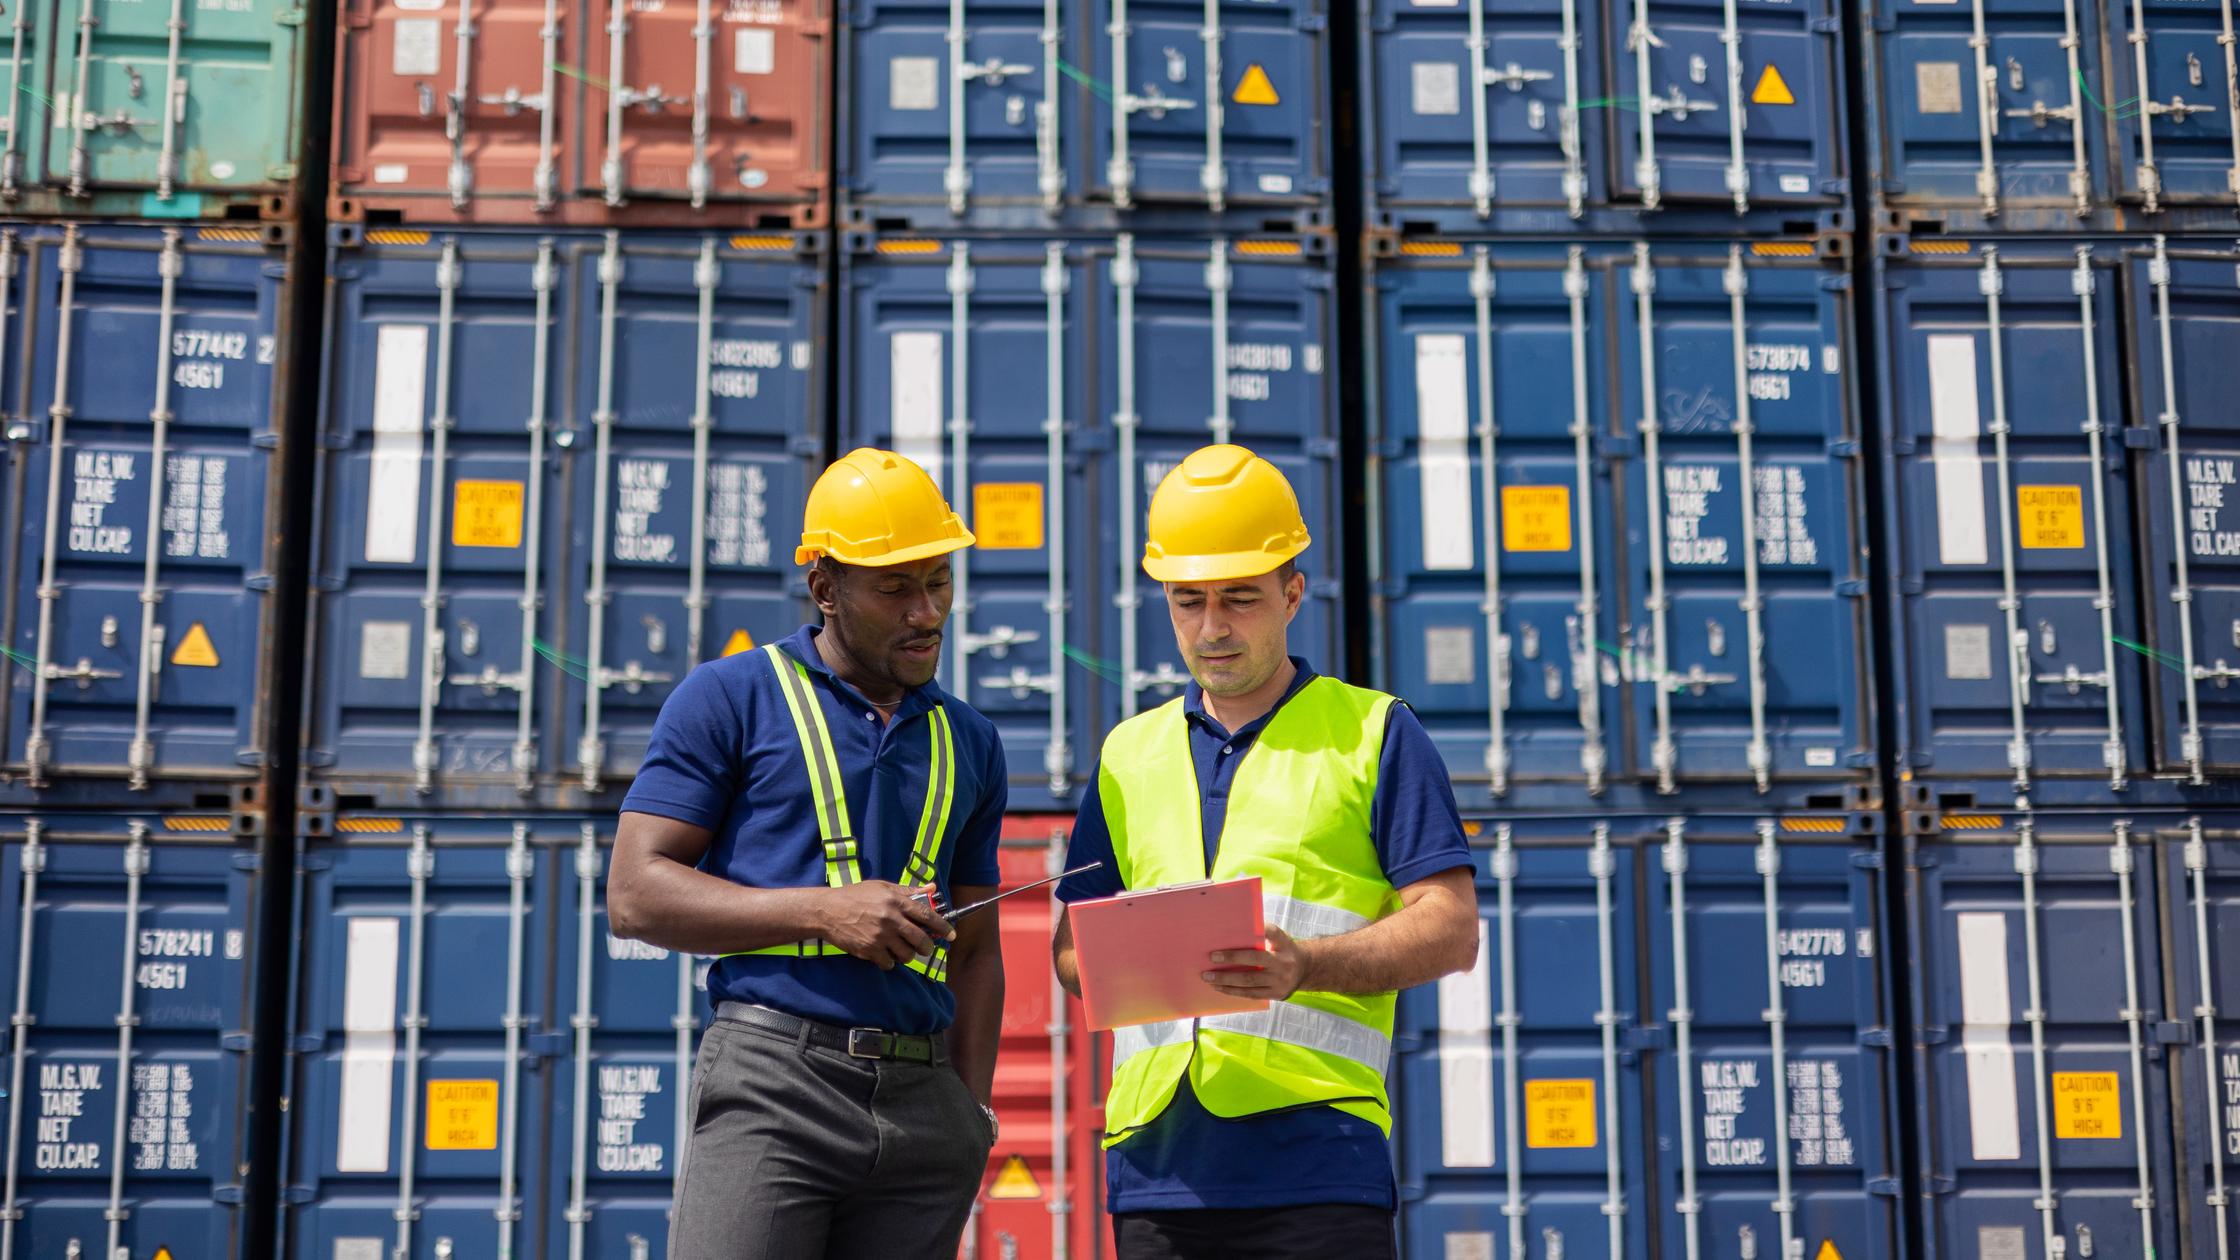 Supply Chain in Manufacturing - Two Commercial dock workers examining and confirm shipment at cargo container yard